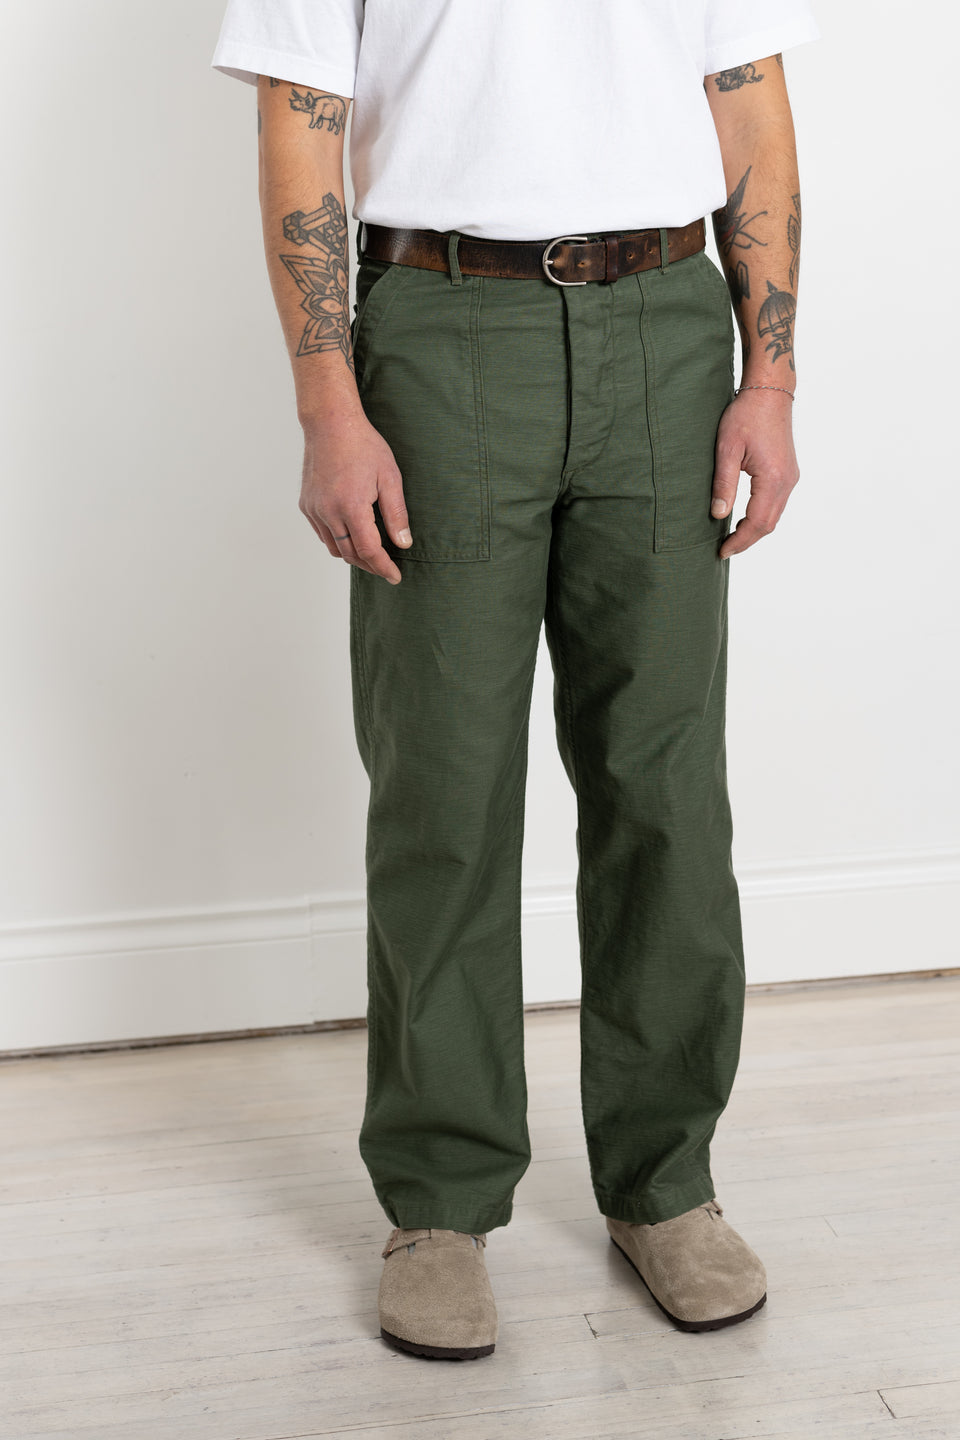 orSlow Japan 23AW FW23 Men's Collection US Army Fatigue Pants Regular Fit Green  Calculus Victoria BC Canada